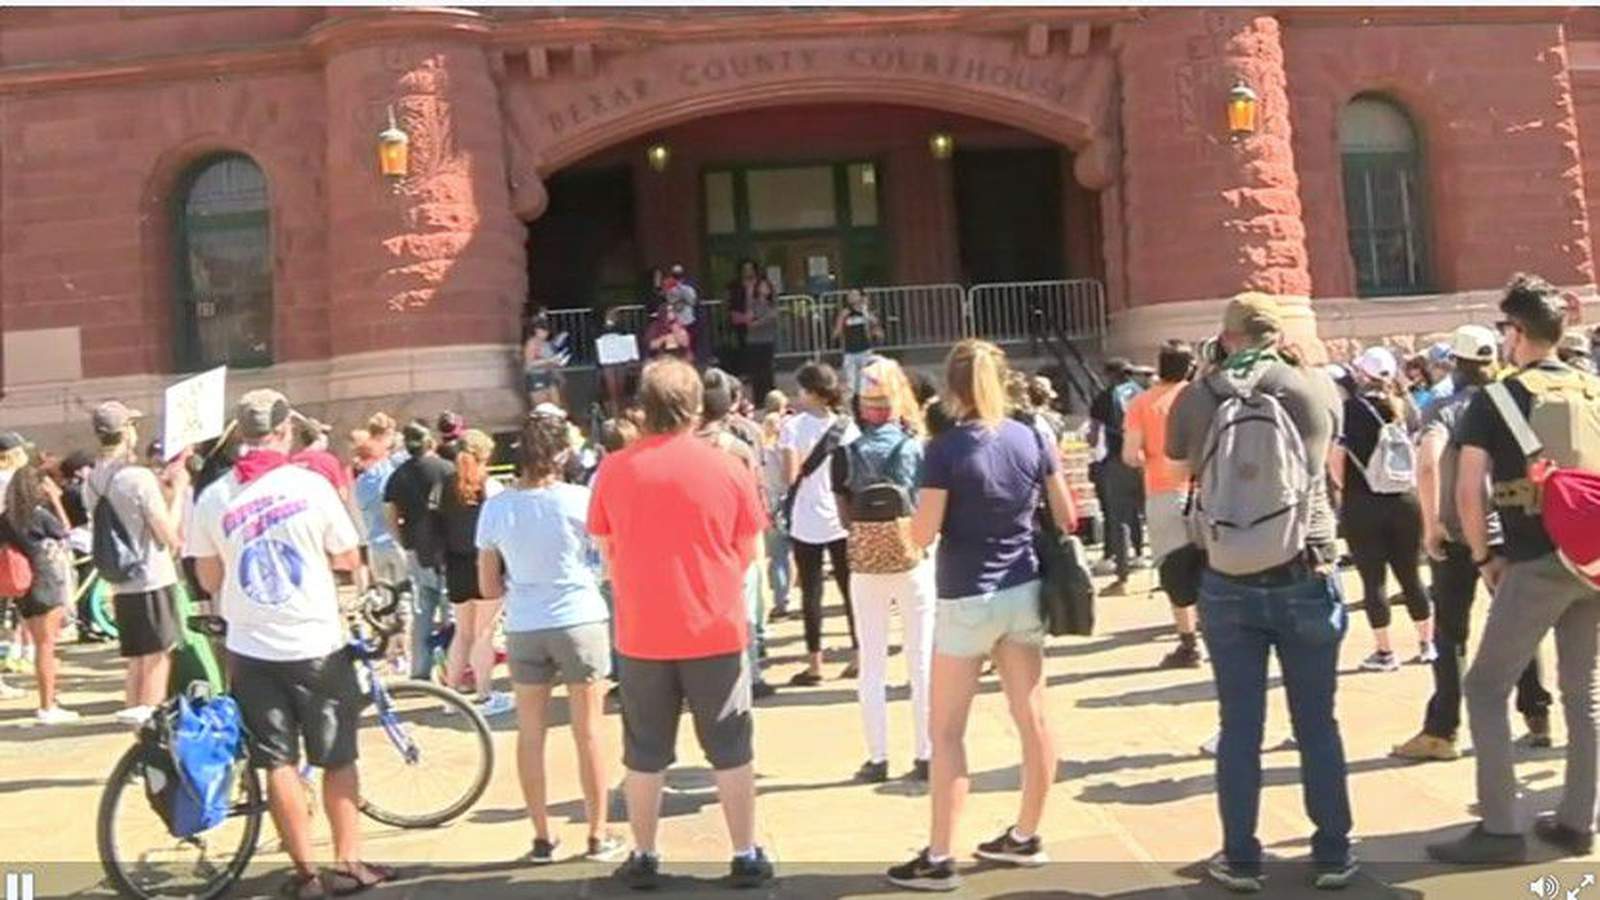 WATCH LIVE: Protesters gather at Bexar County Courthouse in wake of George Floyds death